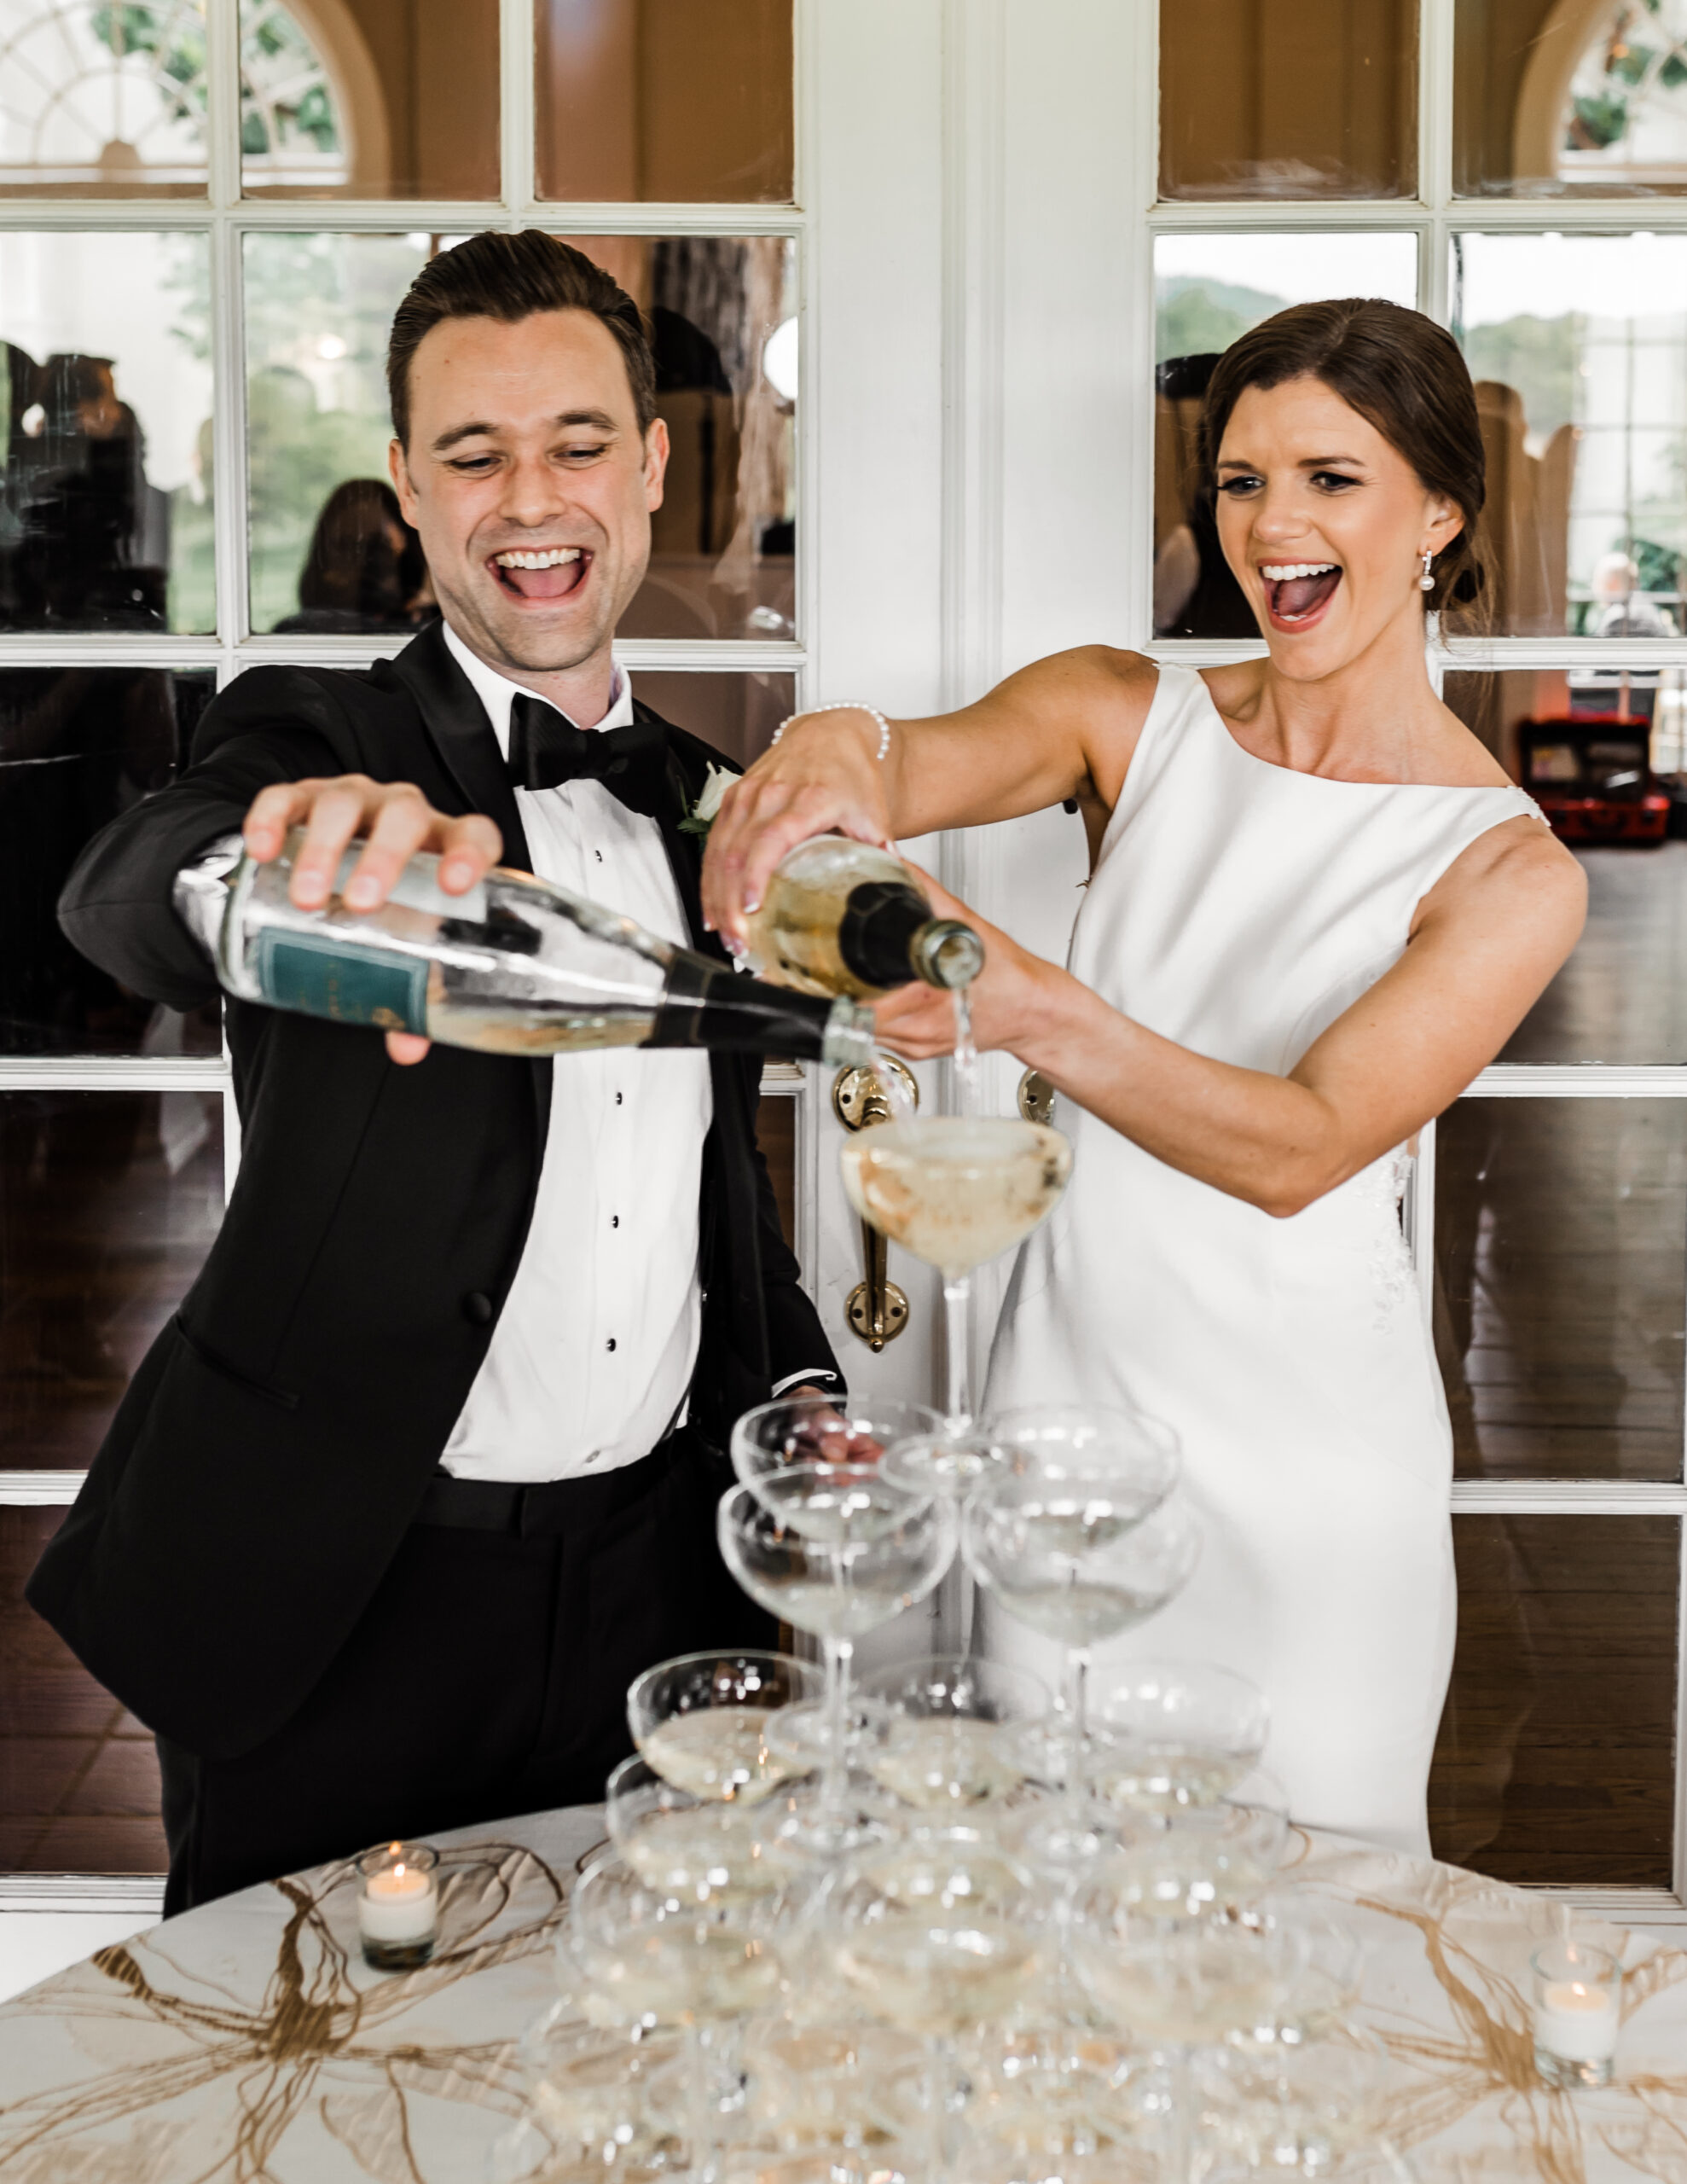 A photo of a bride and groom pouring champagne or wine over a tower of glasses.